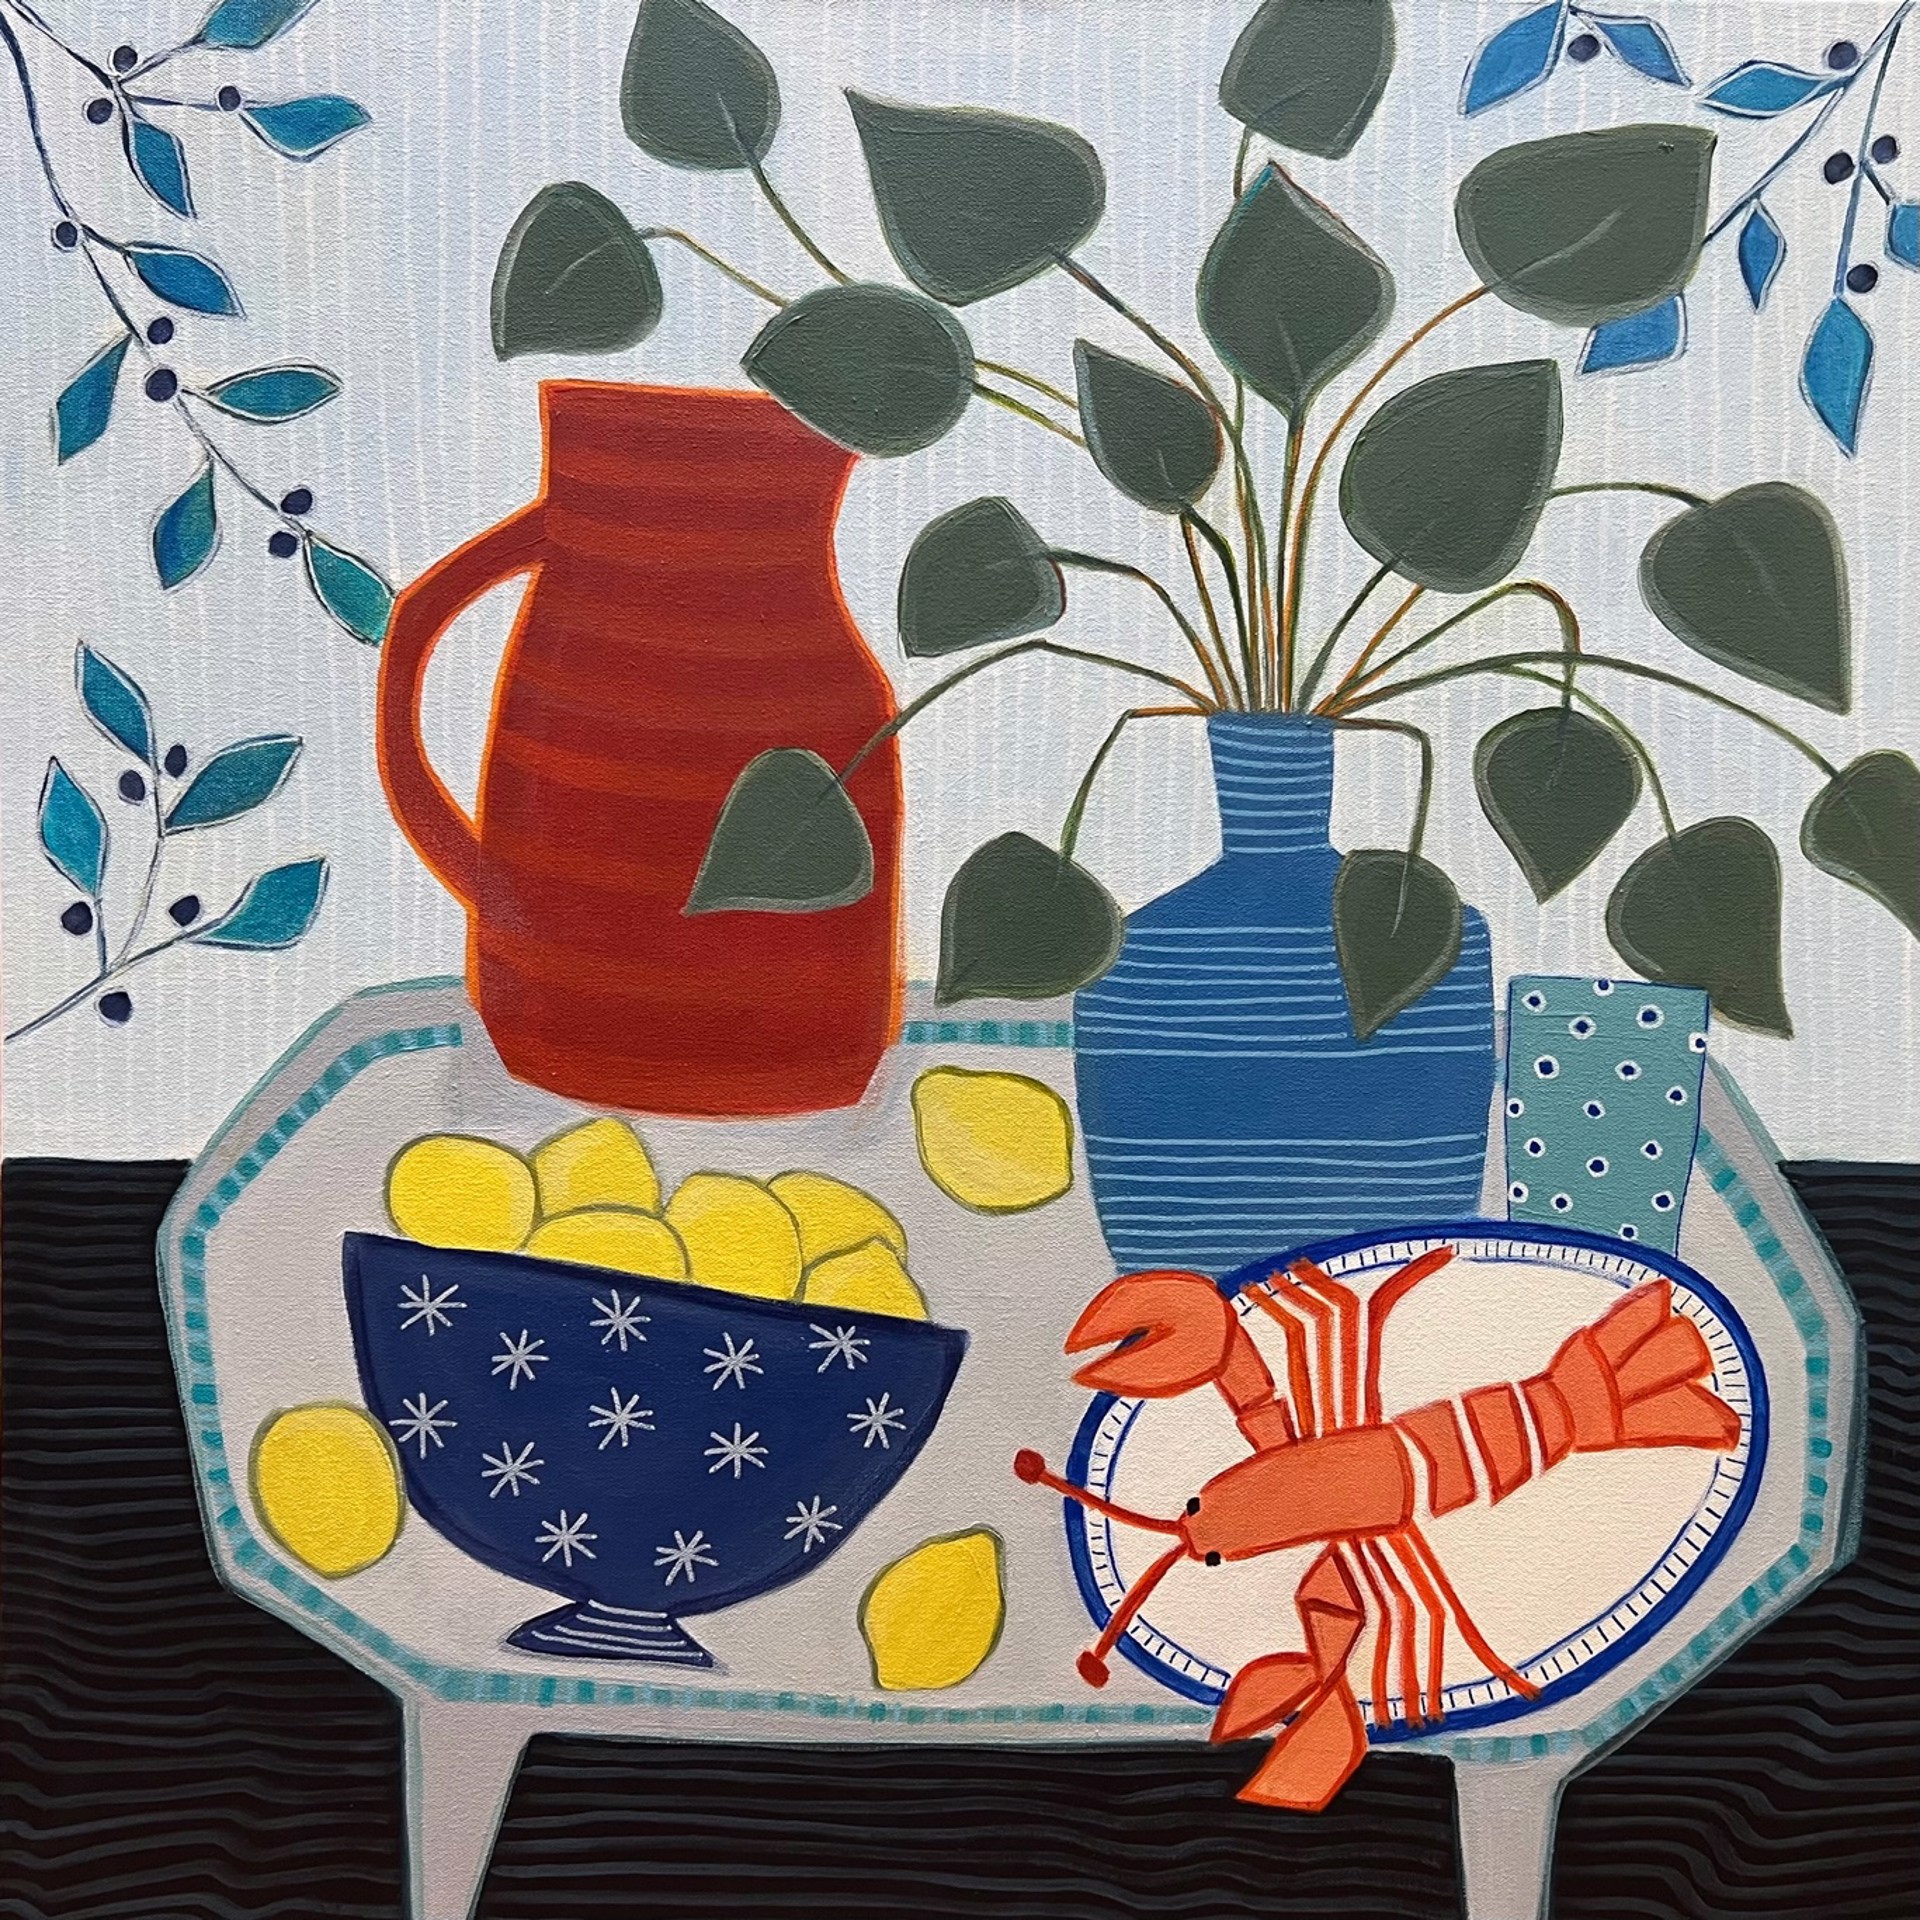 Lobster, Lemons and Blueberries by Joyce Grasso